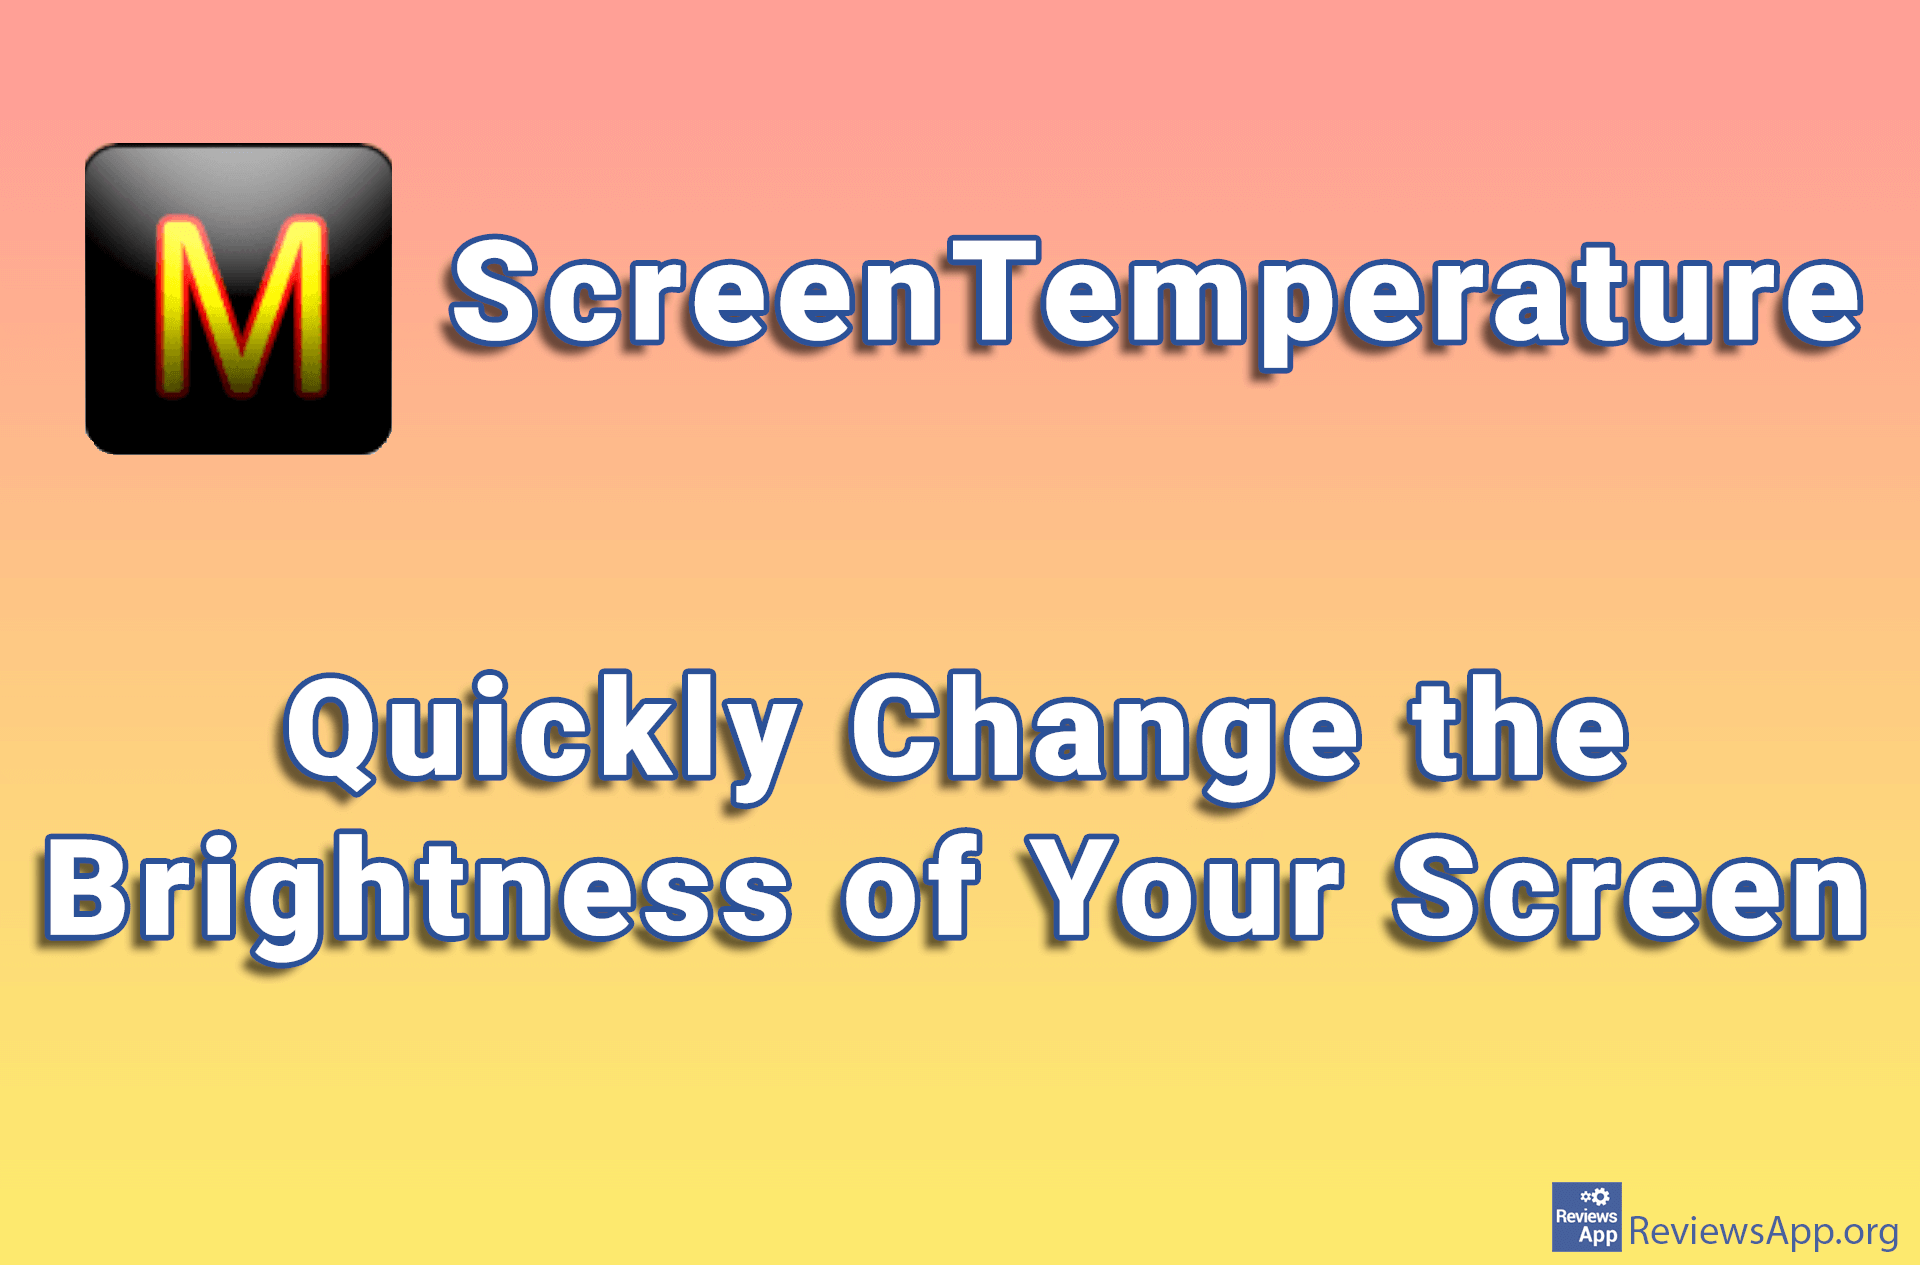 ScreenTemperature – Quickly Change the Brightness of Your Screen